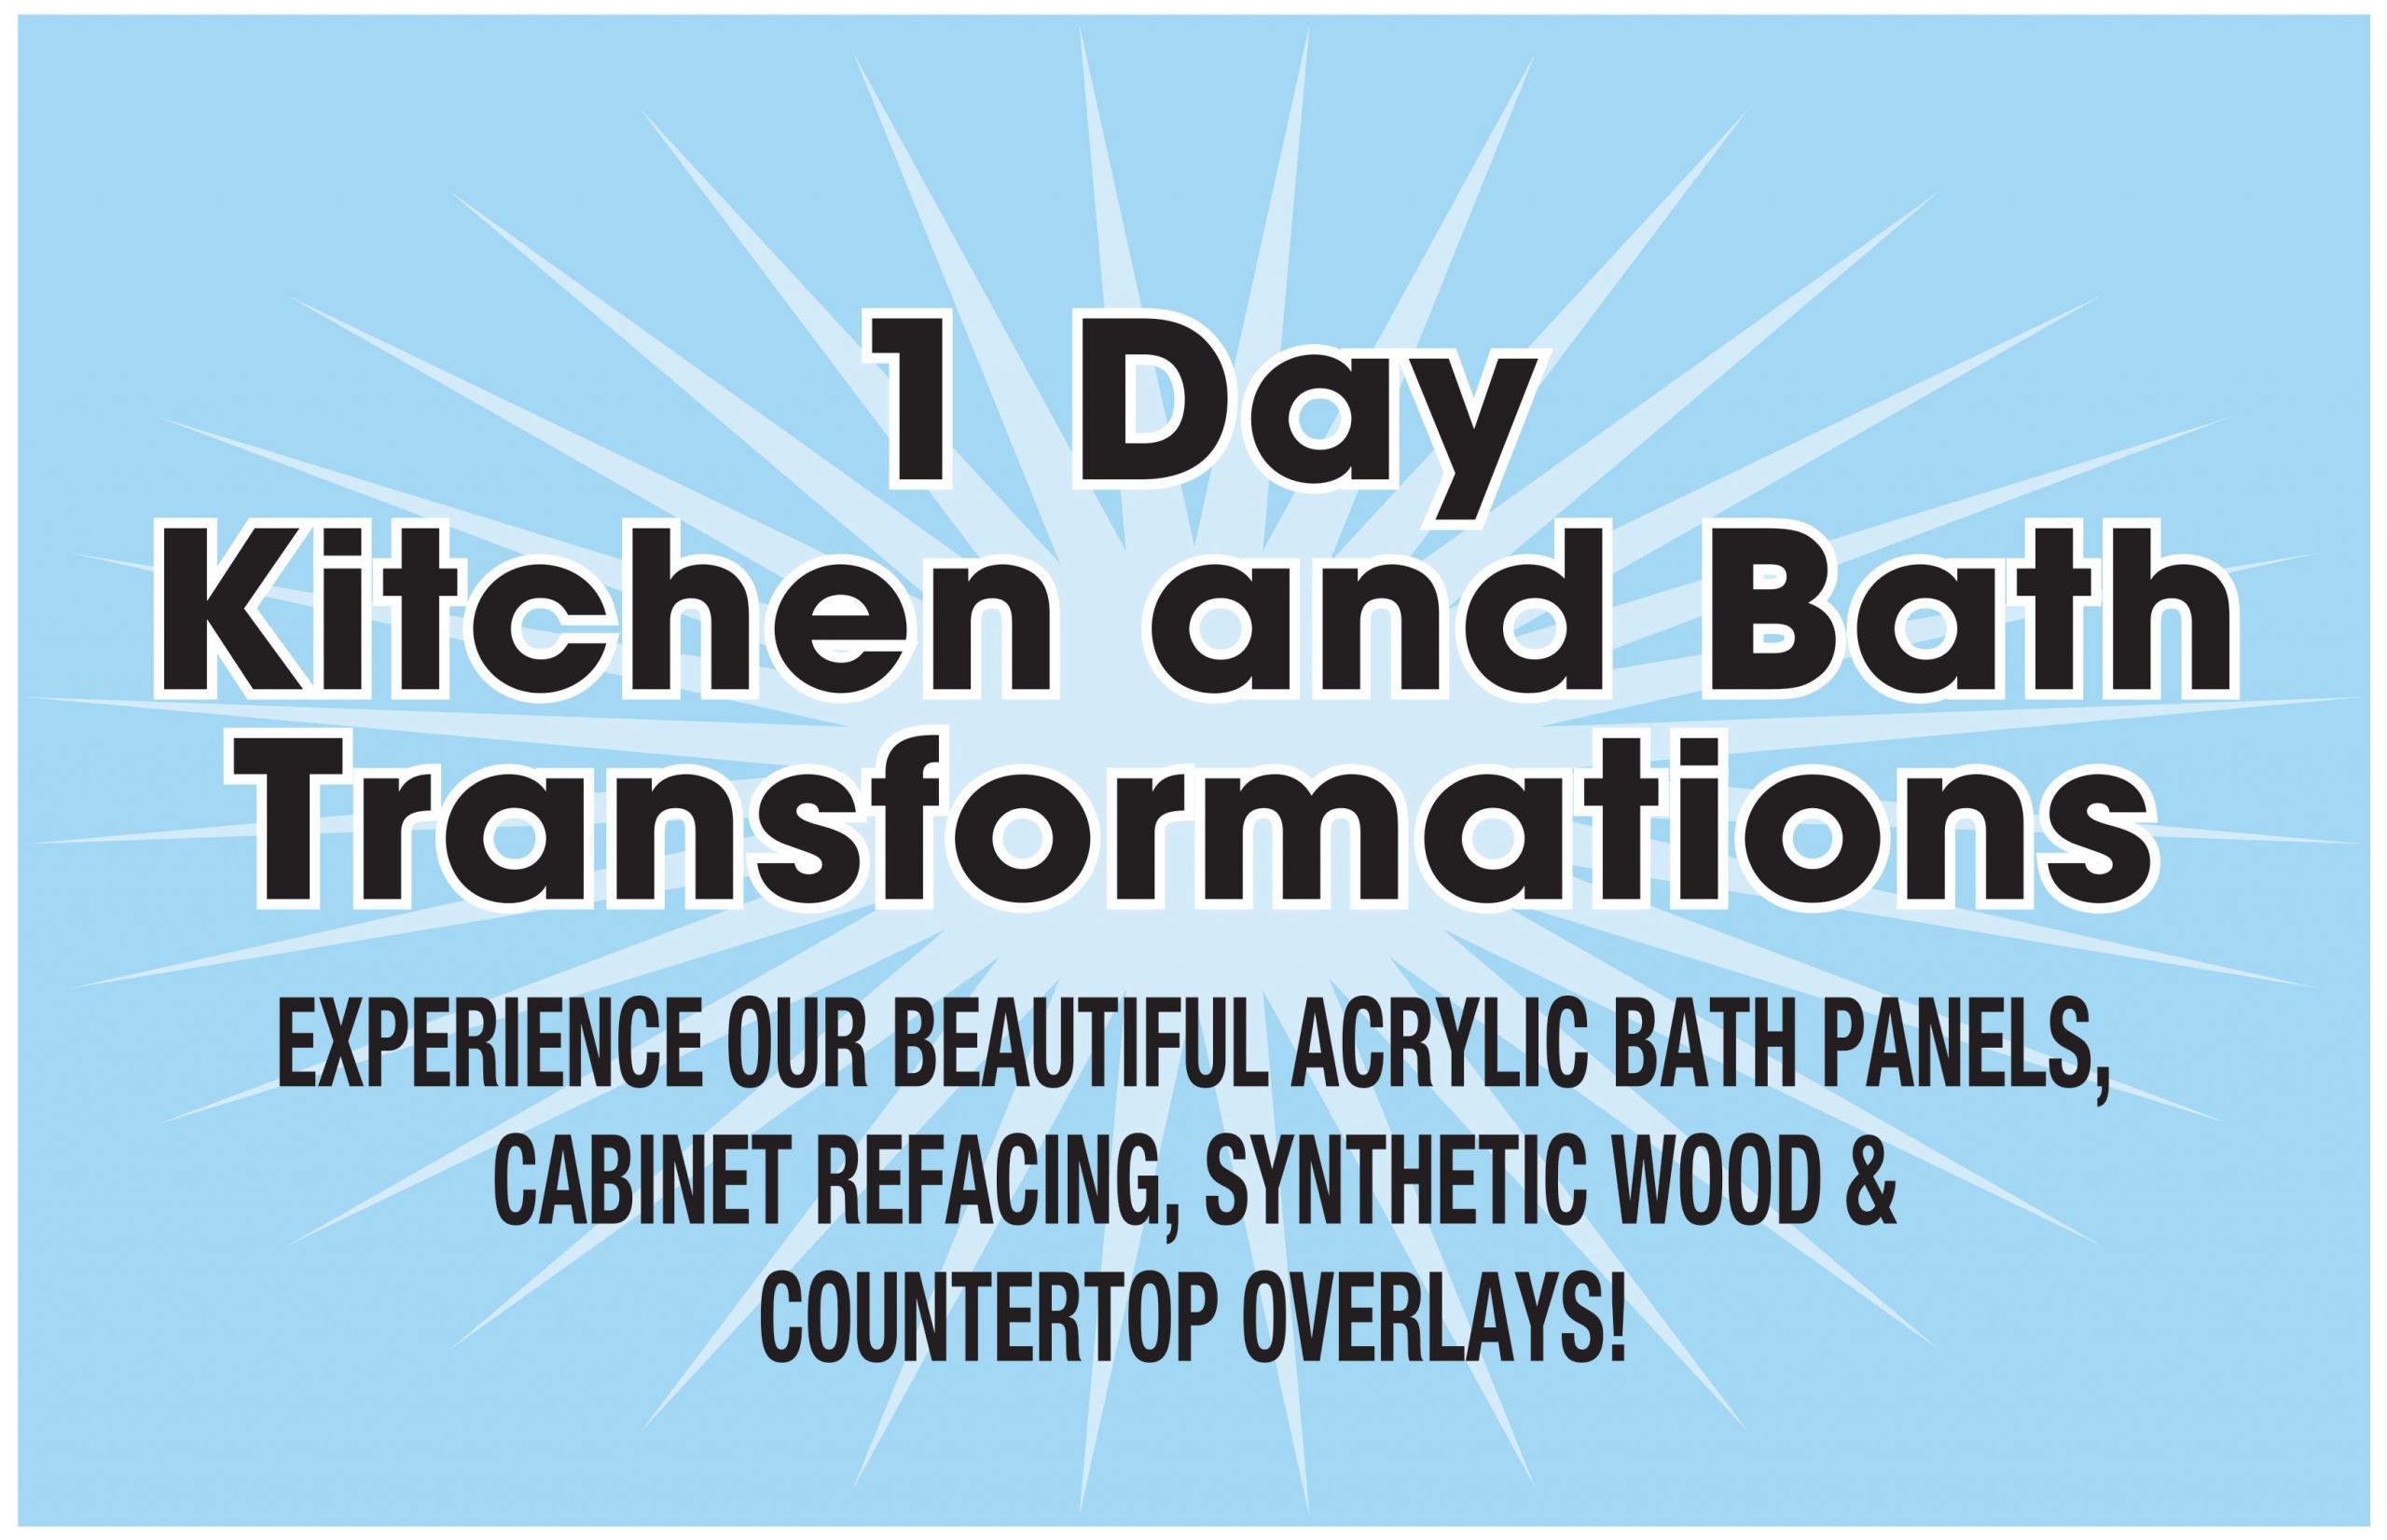 1 day kitchen and bath transformations